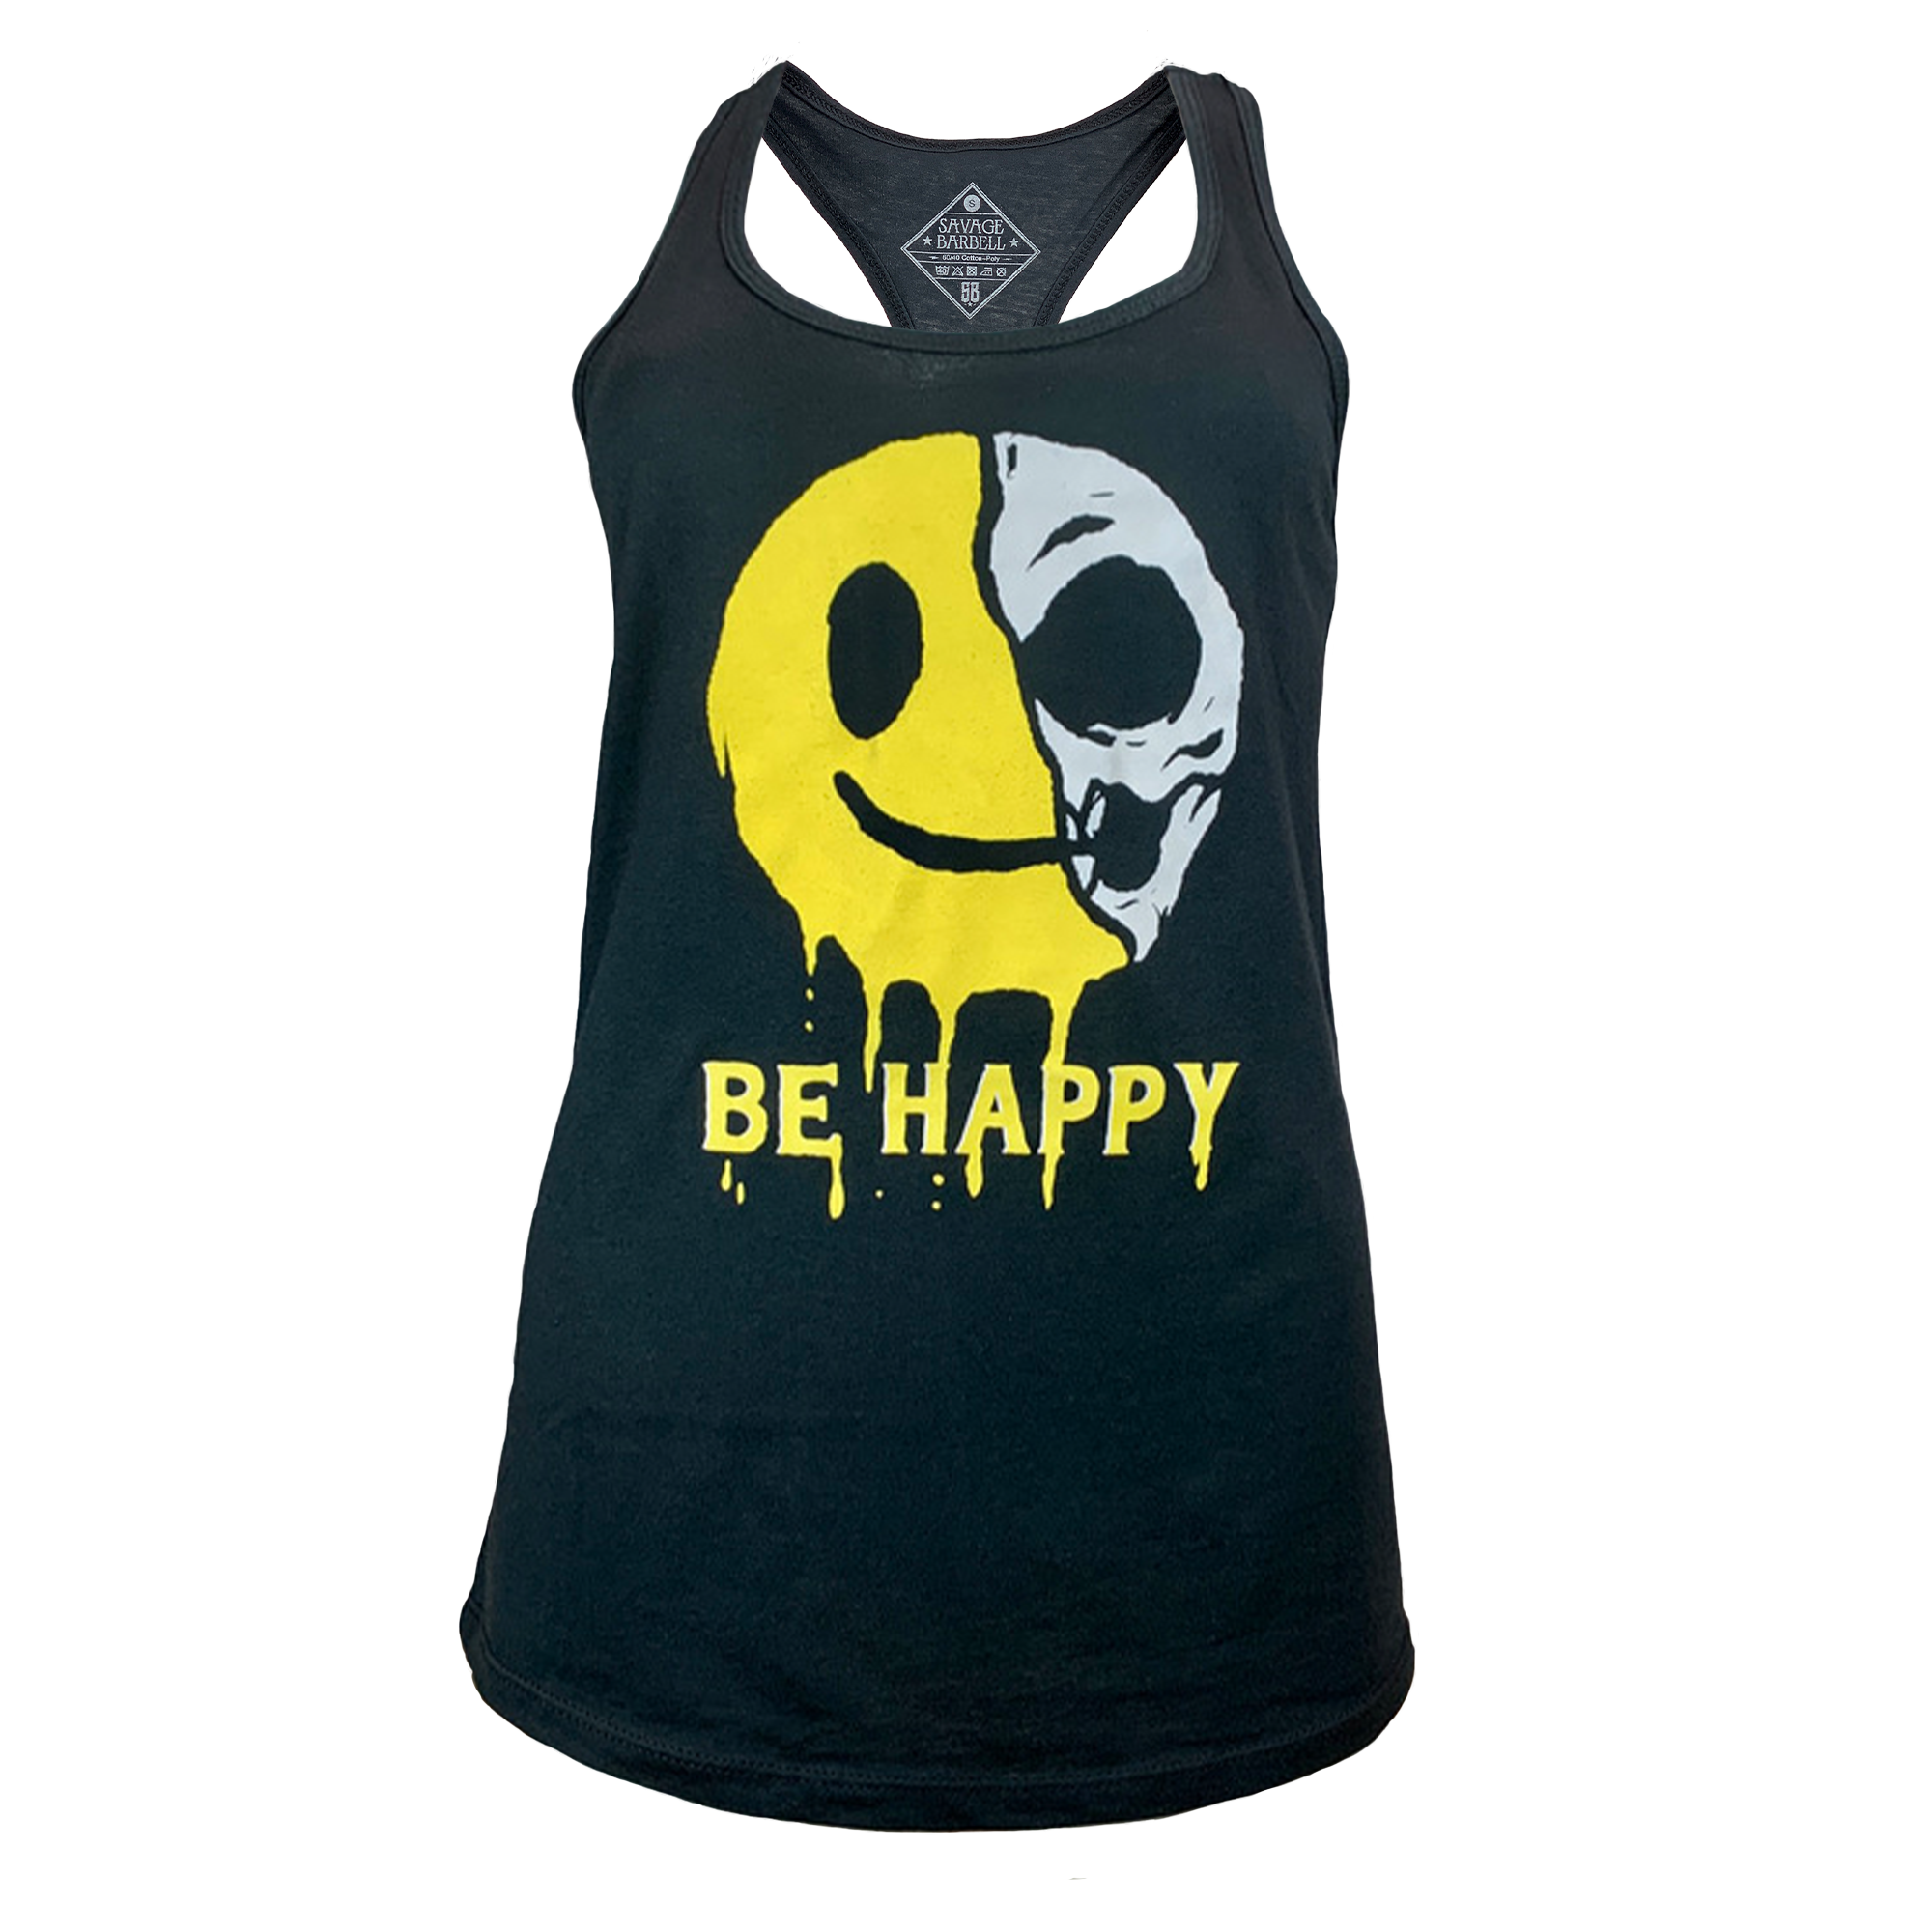 Women's Be Happy Racer-Back Tank Top - Black - Savage Barbell Apparel